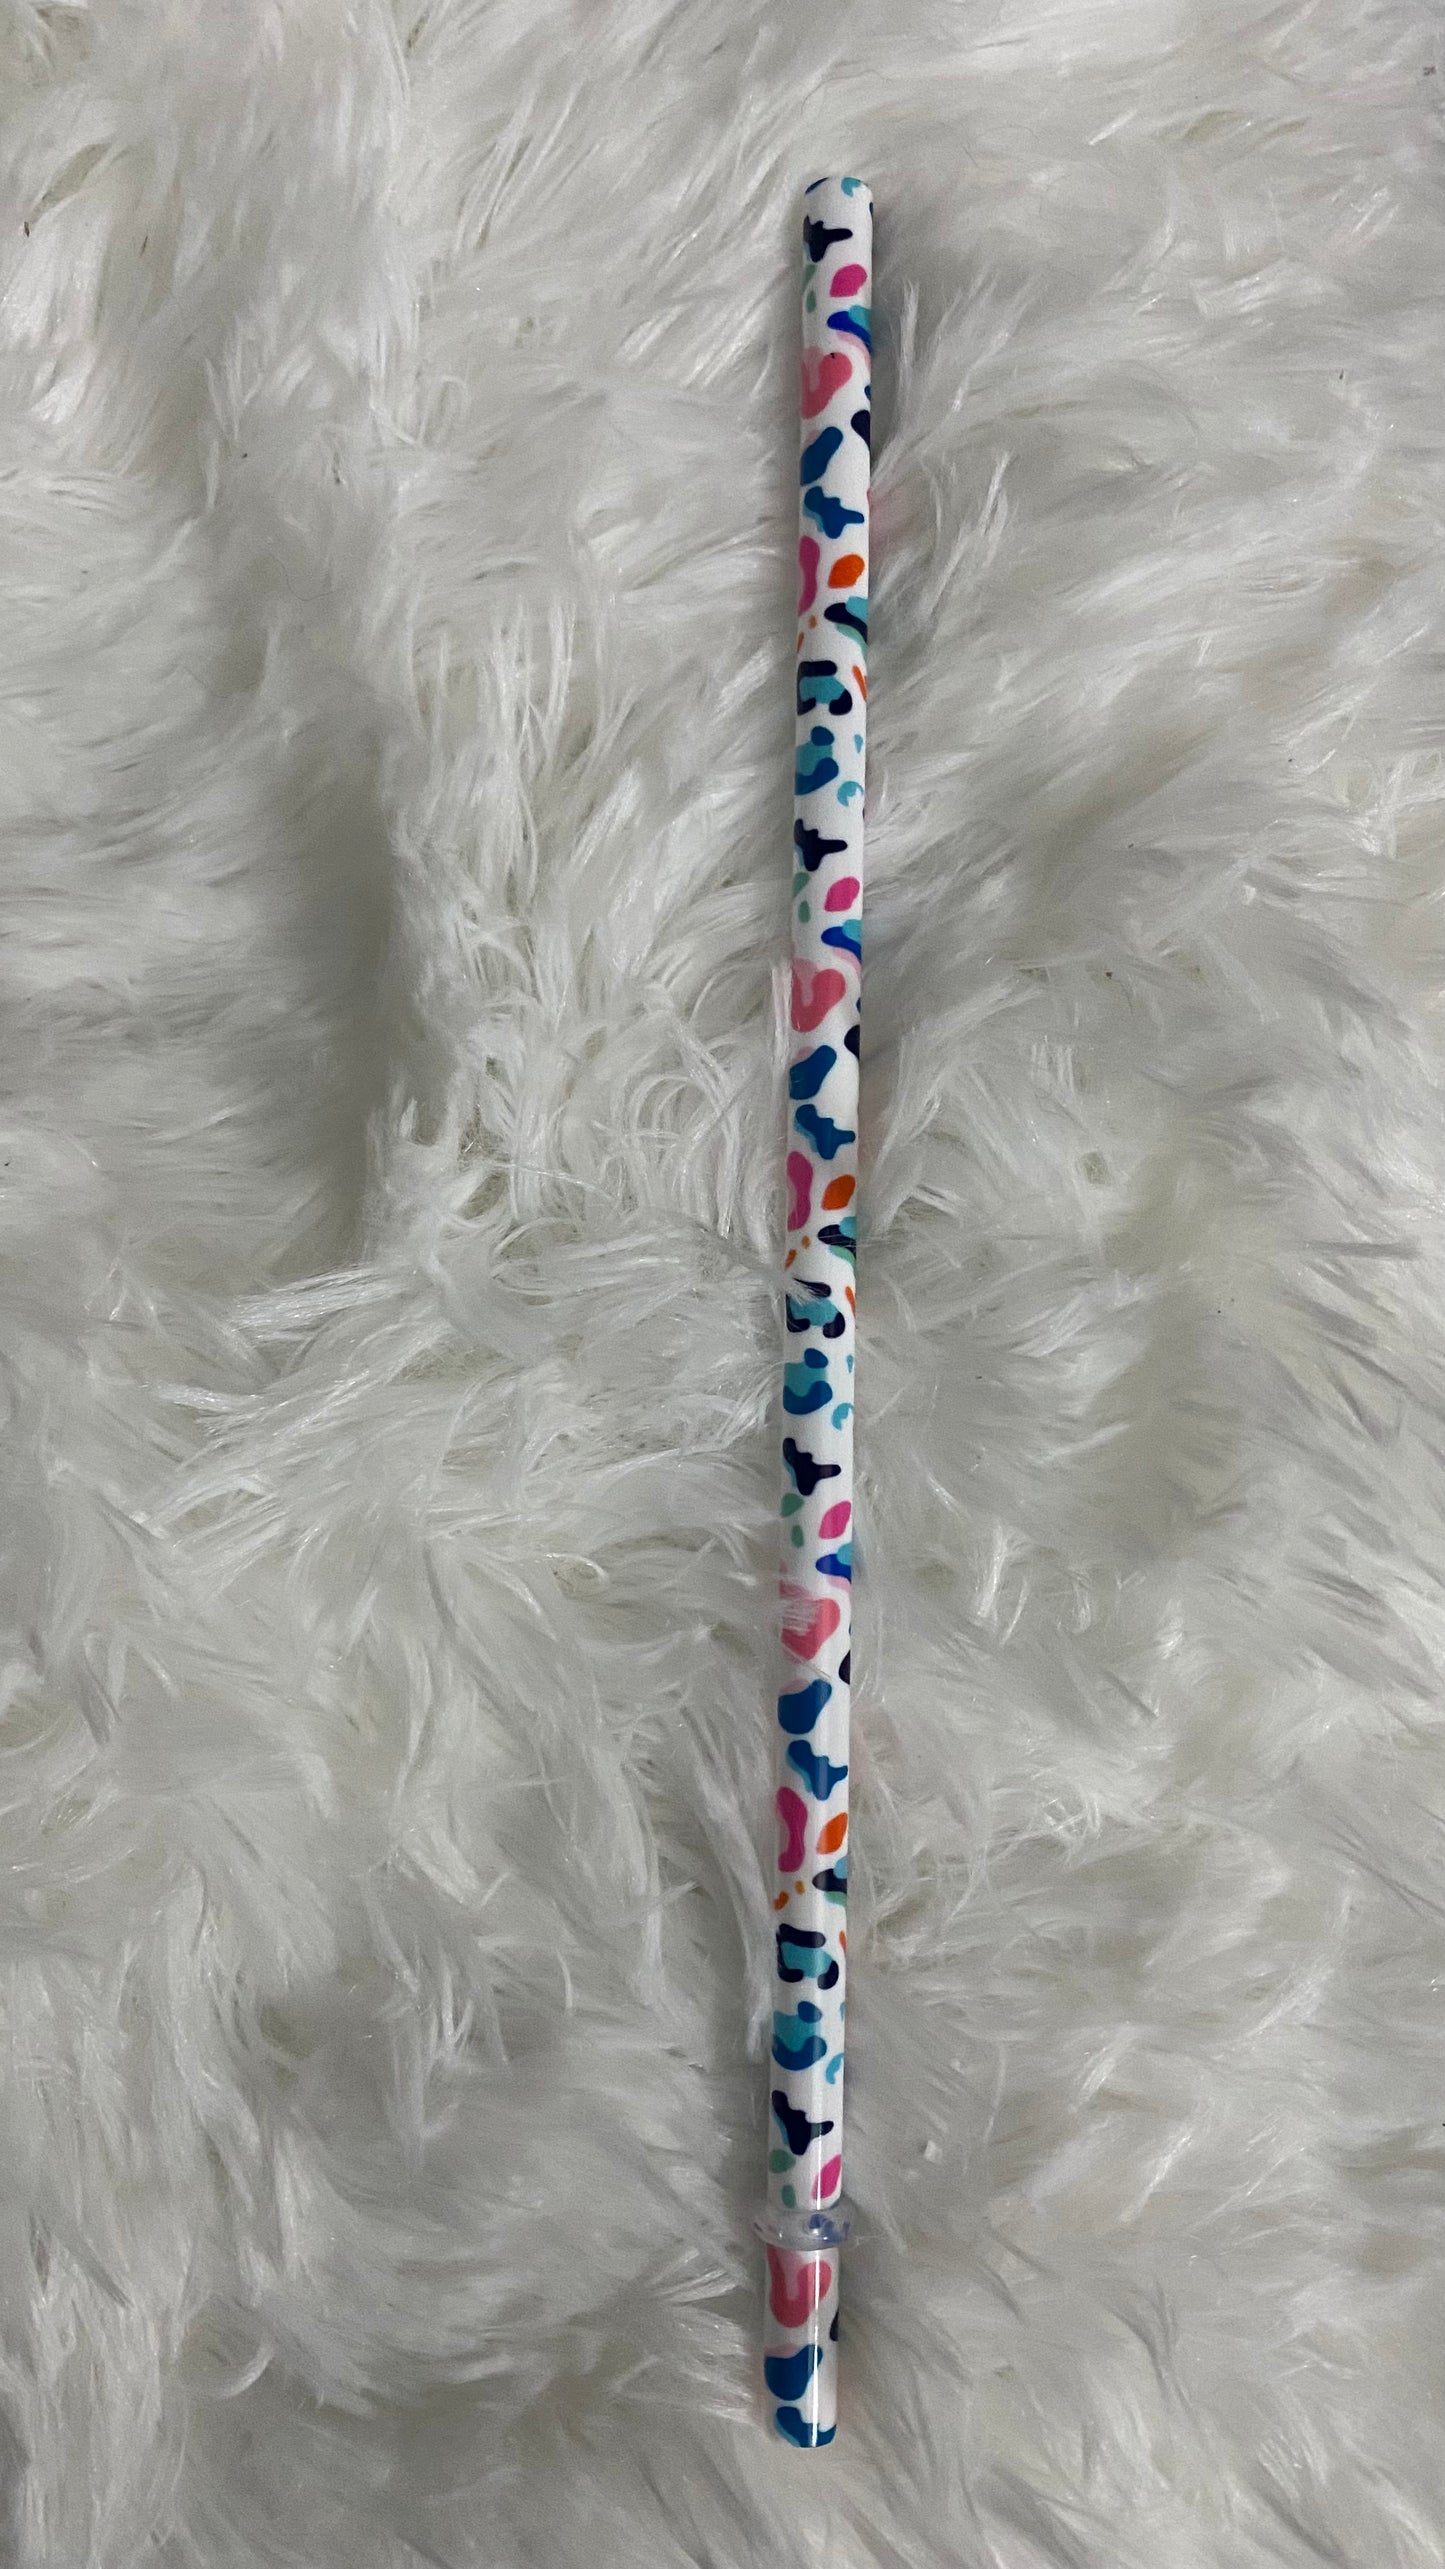 SEMI-HARD PLASTIC STRAW THAT HAS COLORED CHEETAH PRINT WRAPPED AROUND IT WITH STOPPER